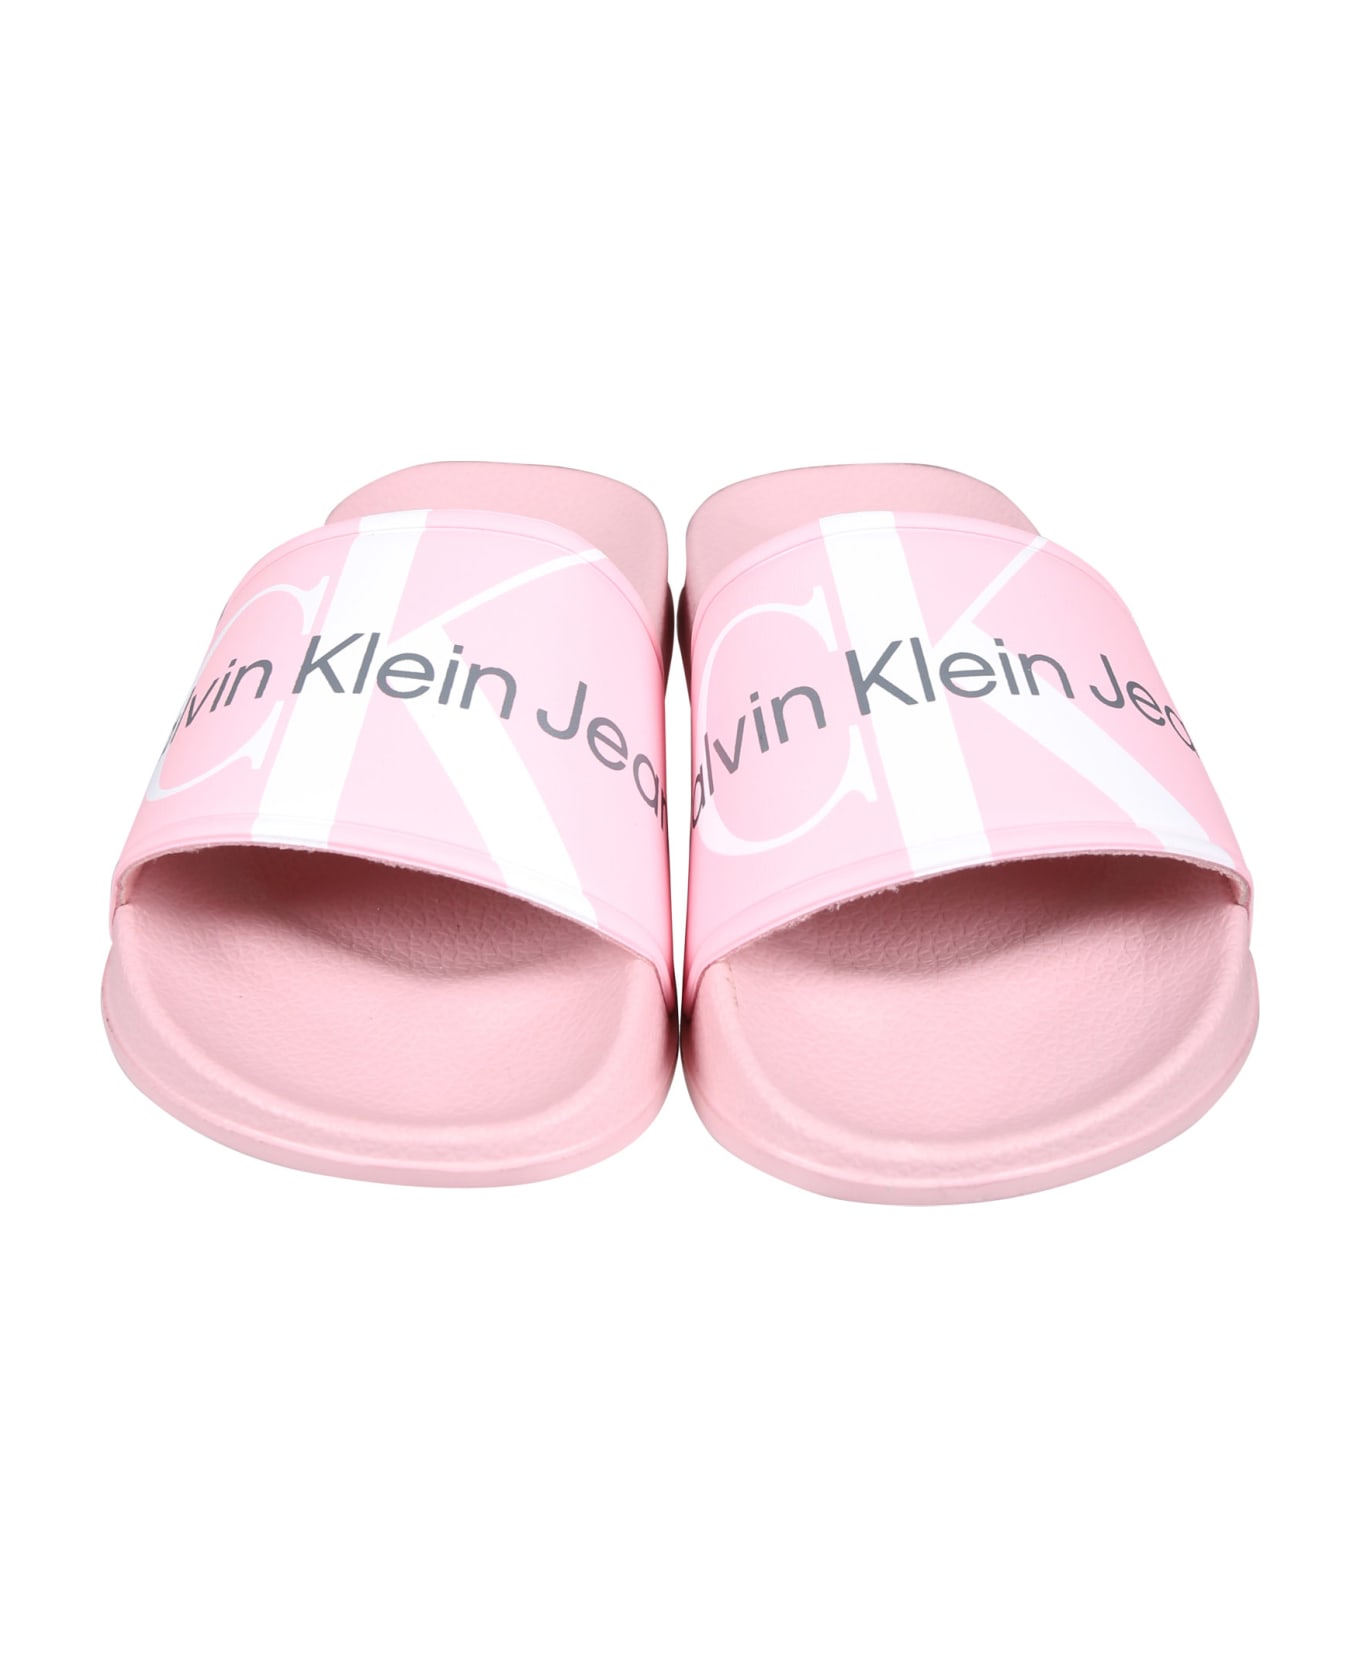 Calvin Klein Pink Slippers For Girl With Logo - Pink シューズ